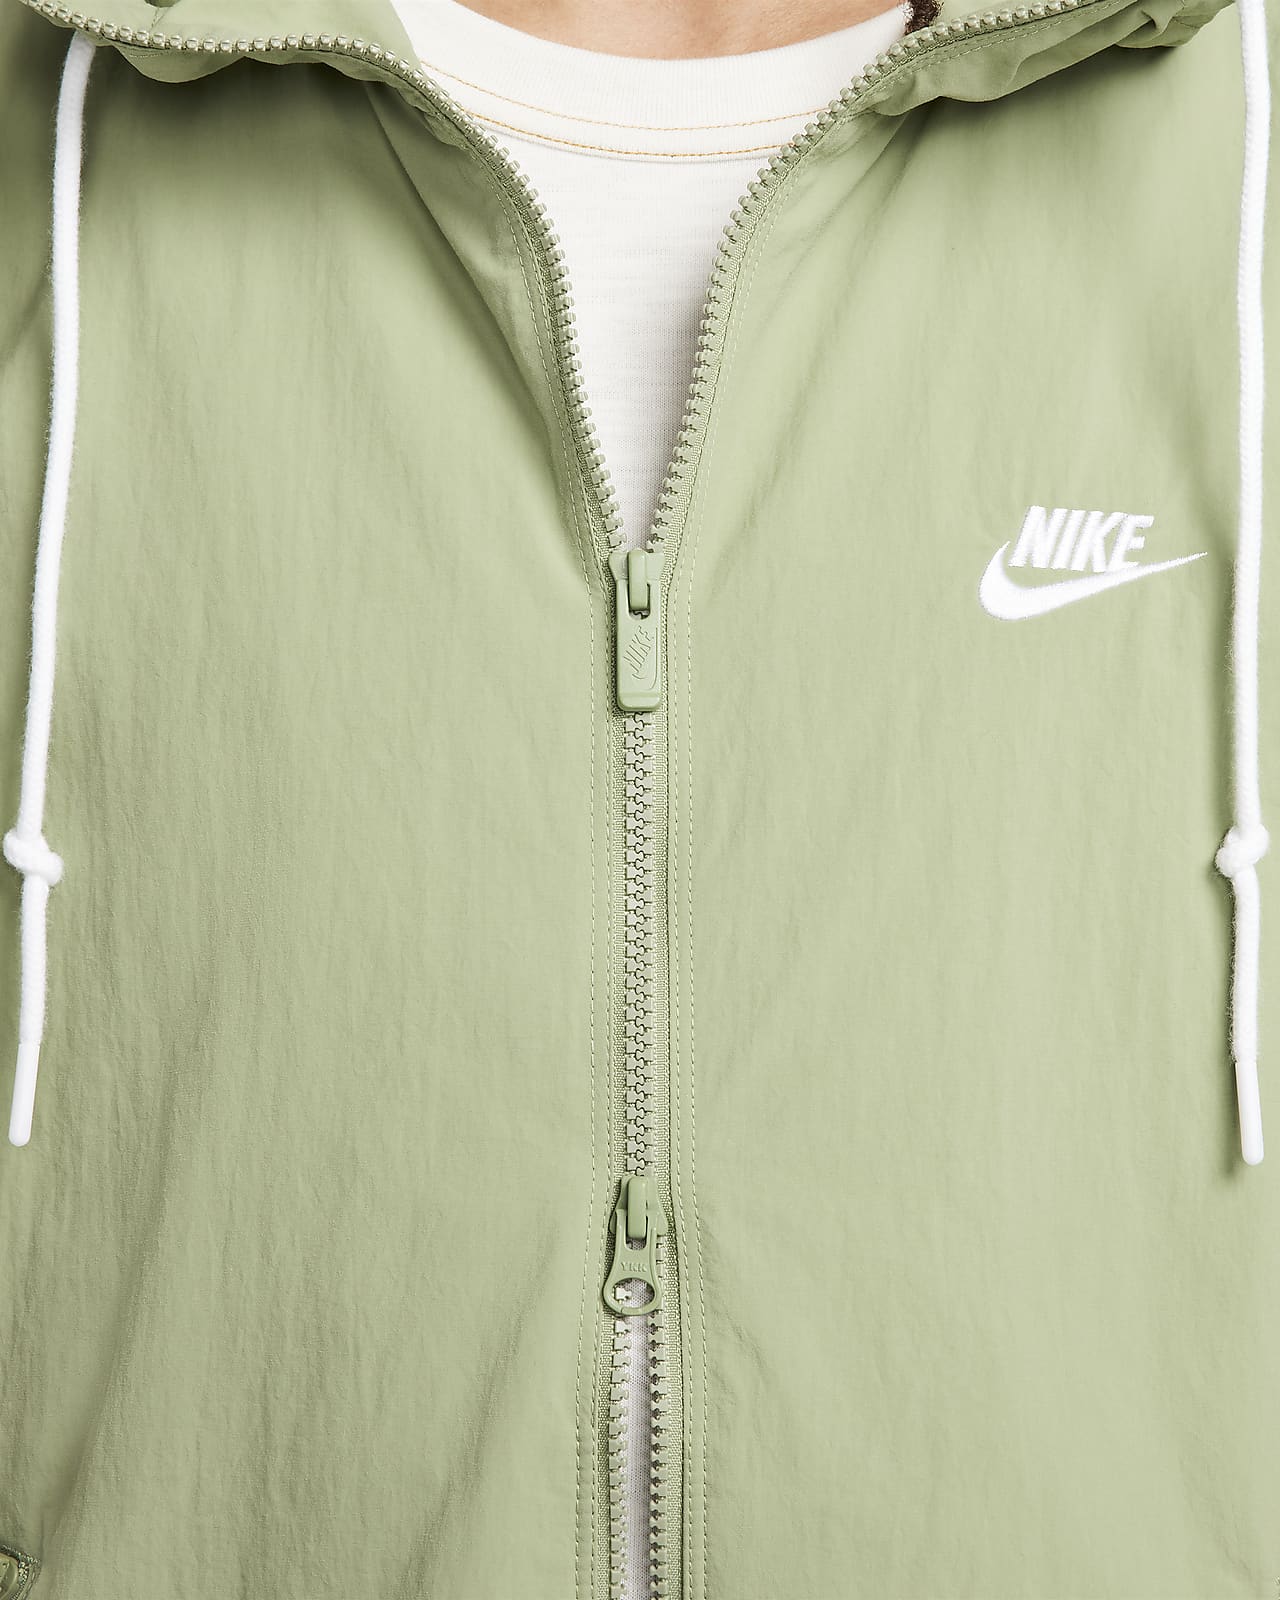 Performance Woven Zip-Up Jacket in CHALK GREEN